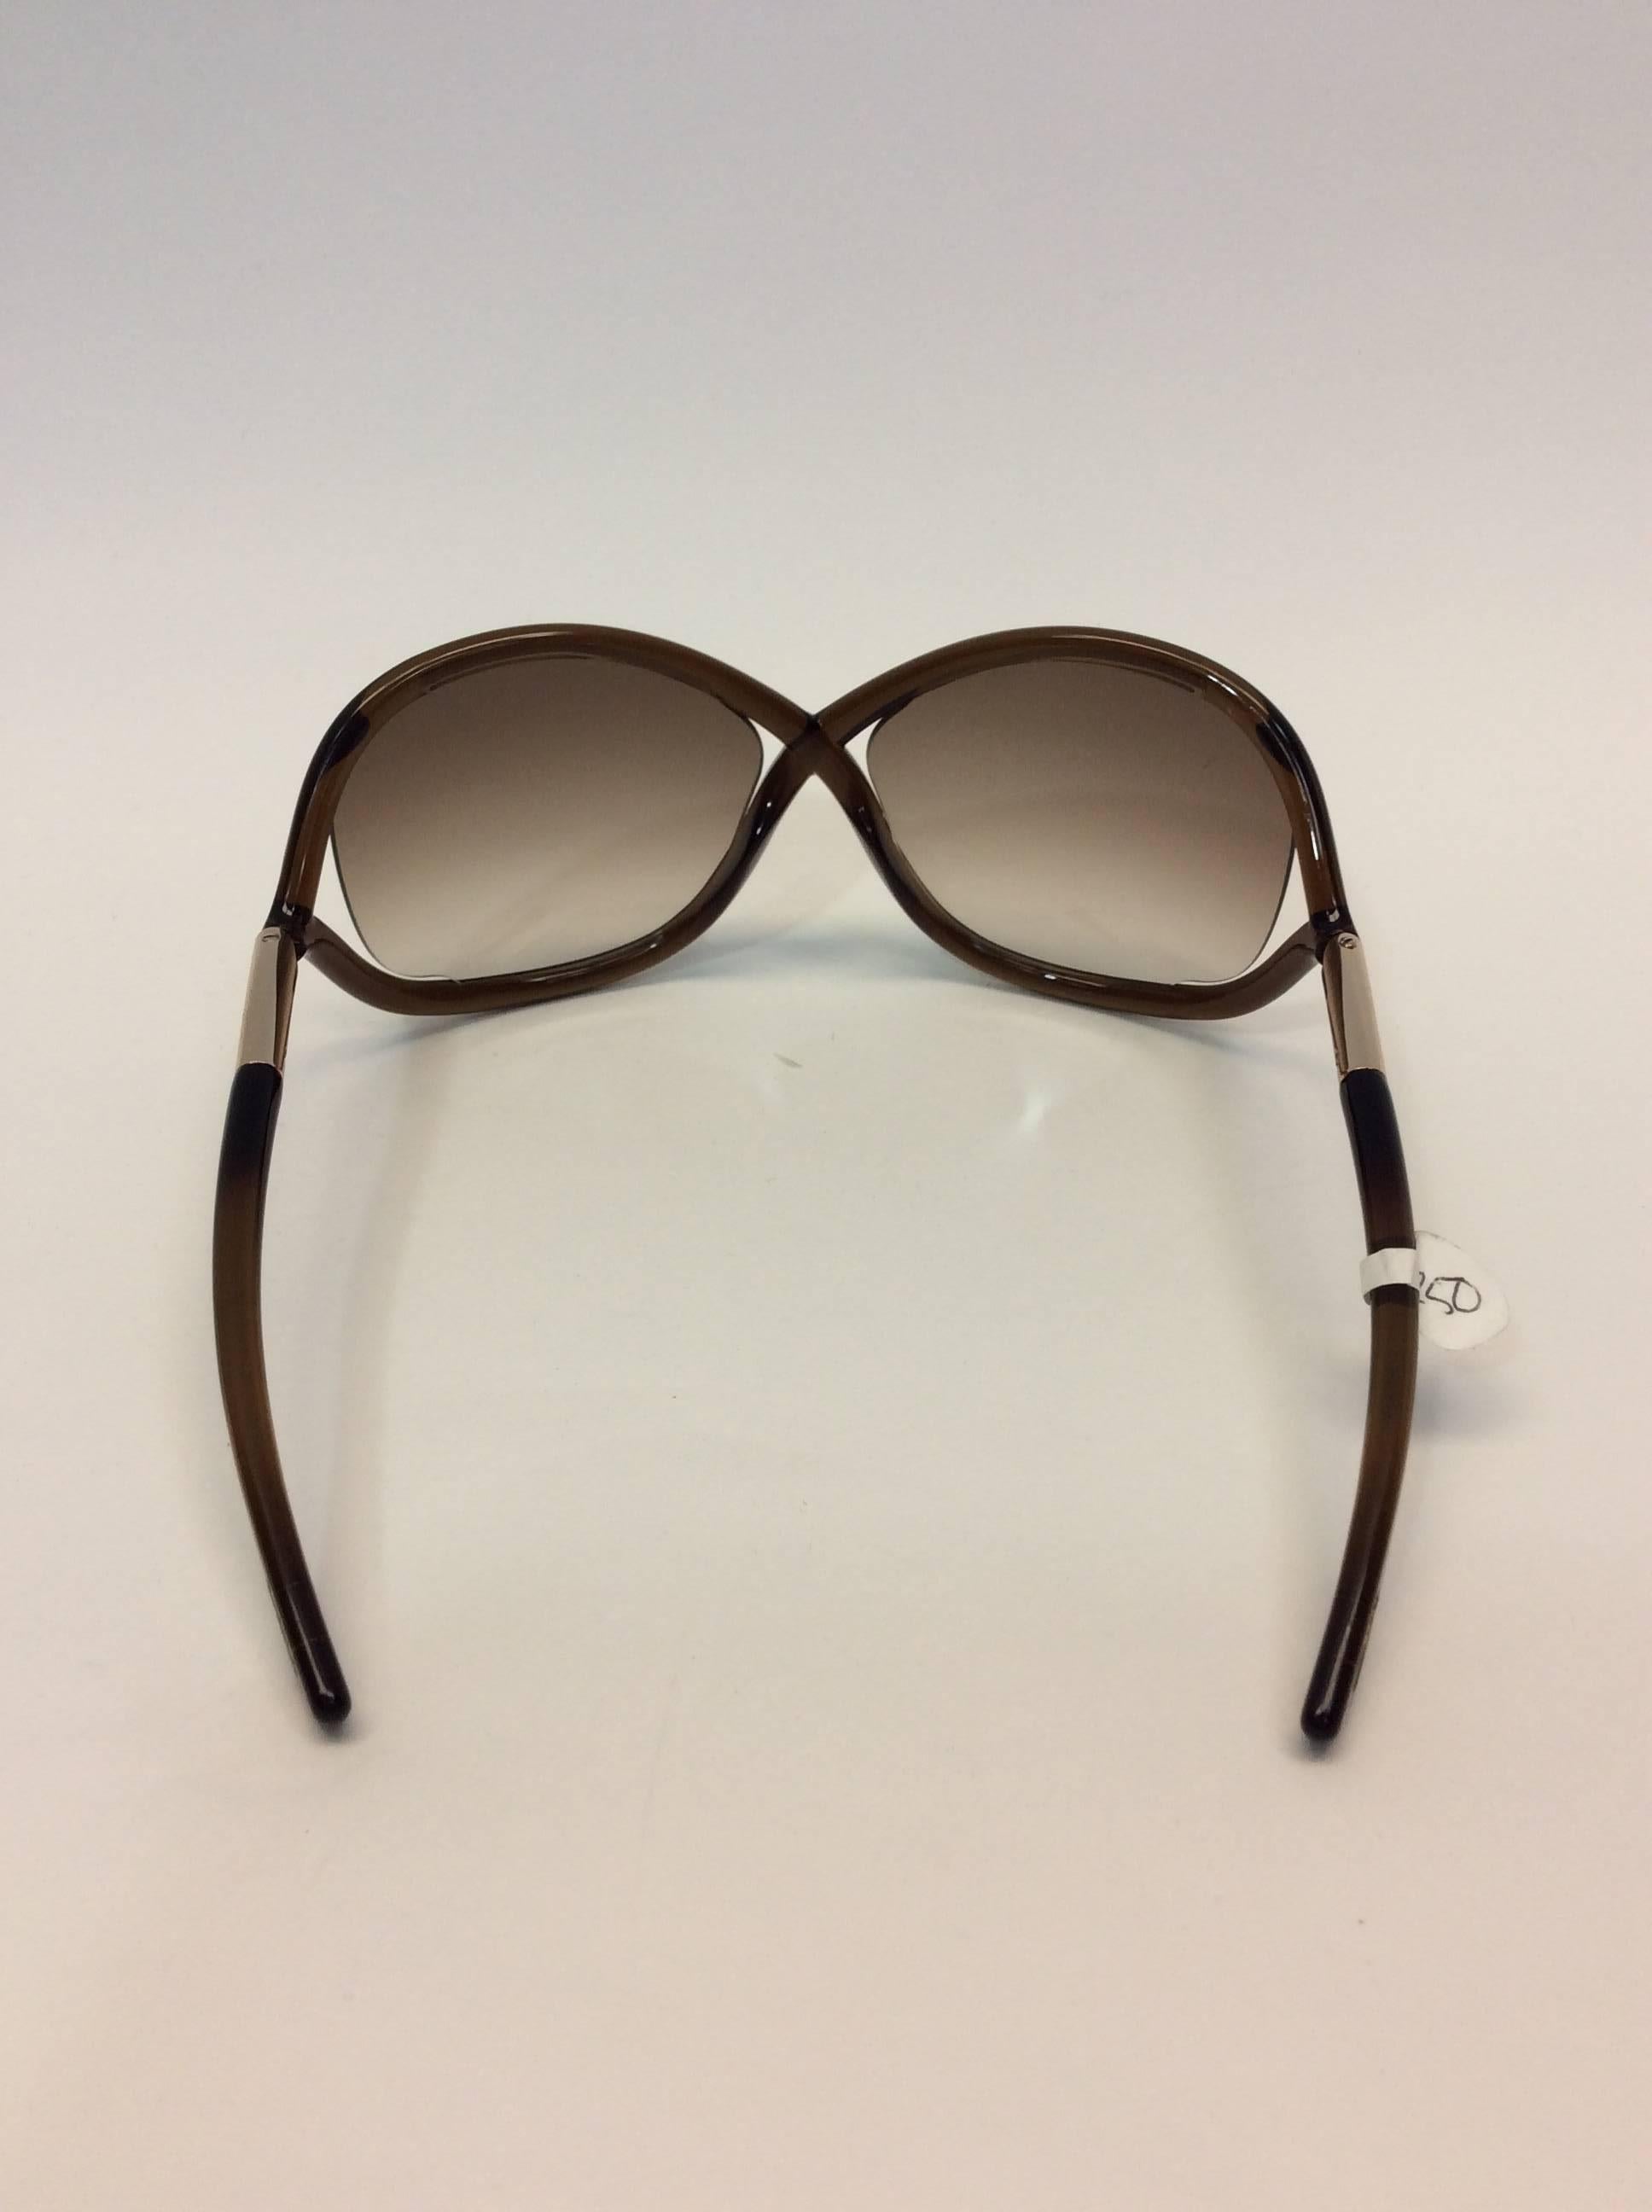 Tom Ford Brown Oversized Sunglasses In Excellent Condition For Sale In Narberth, PA